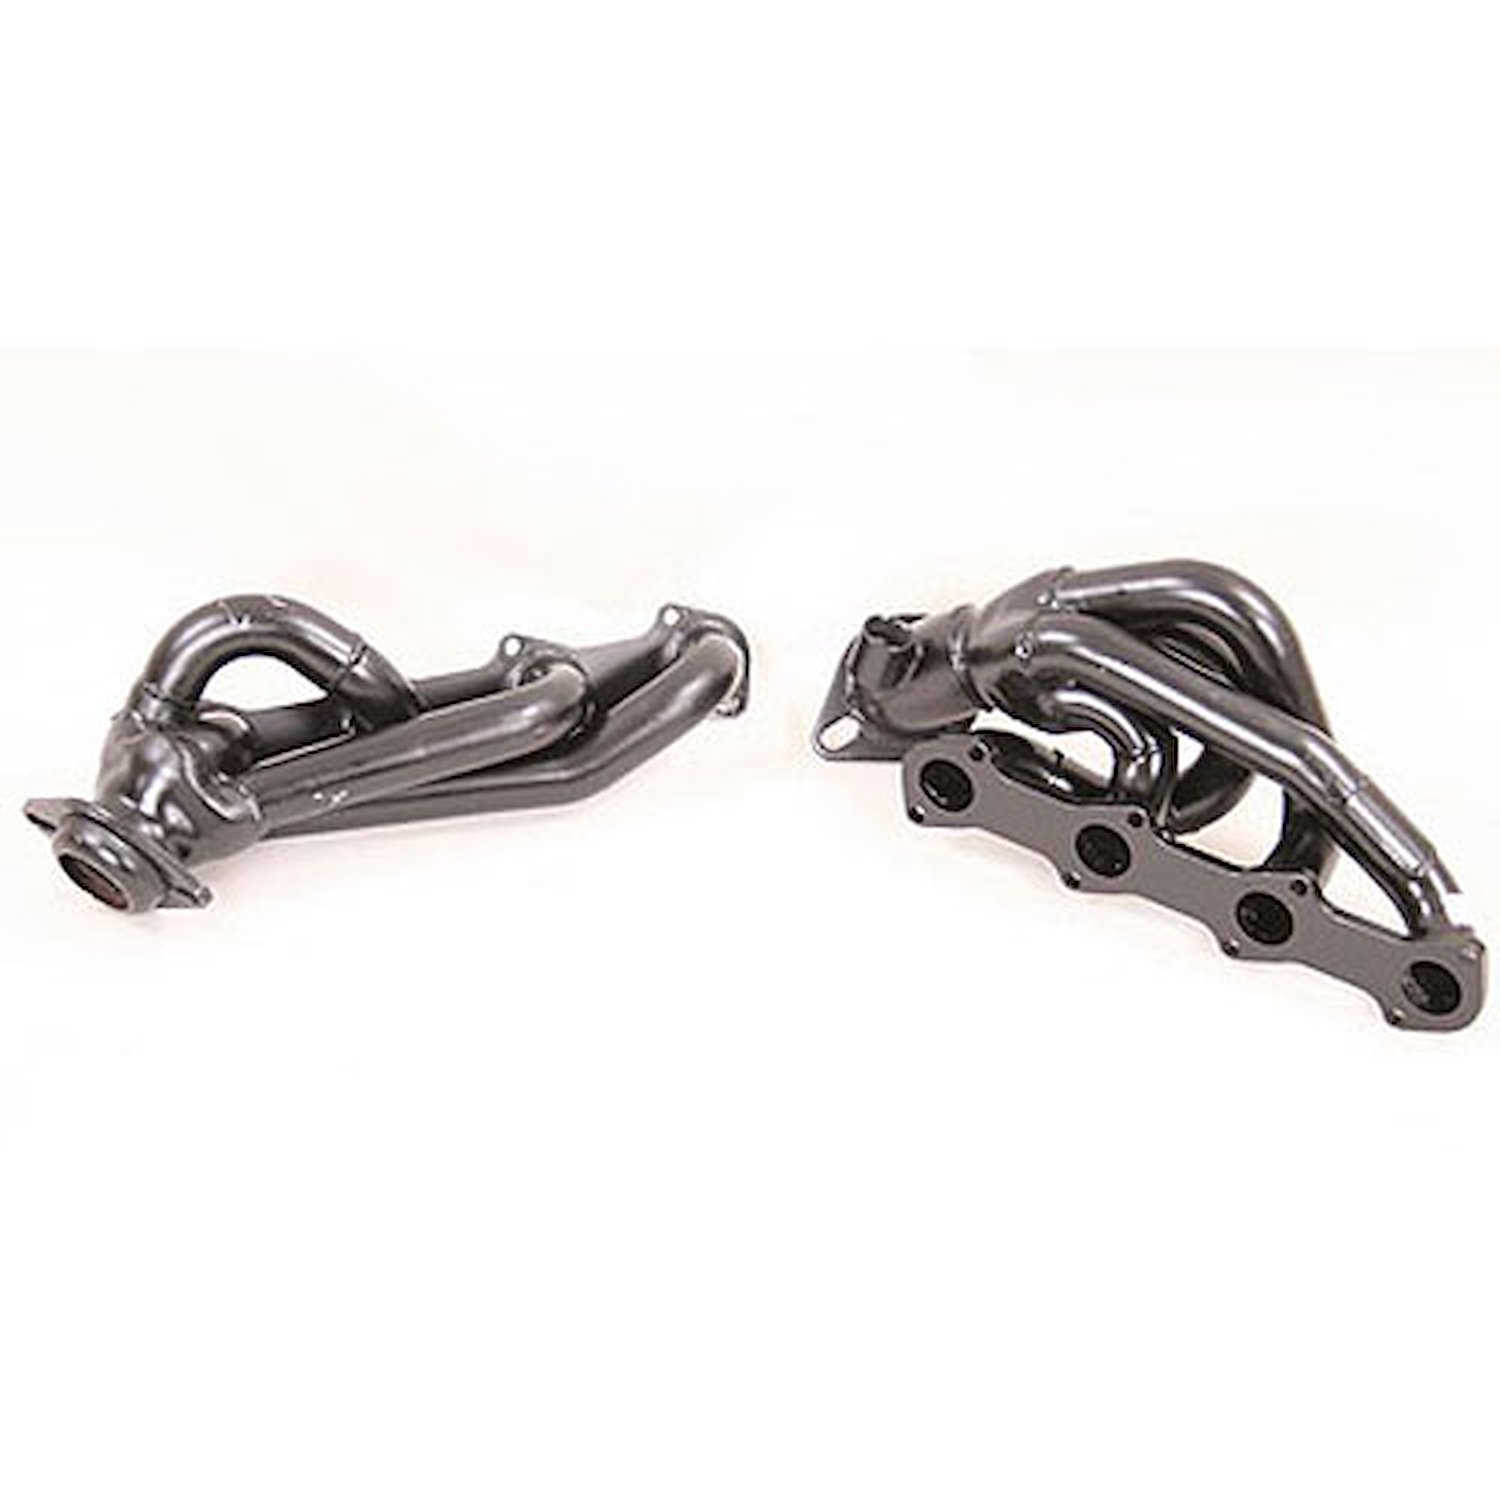 Painted Truck Headers 1997-2003 F-150/F-250 and Expedition 2/4WD 5.4L